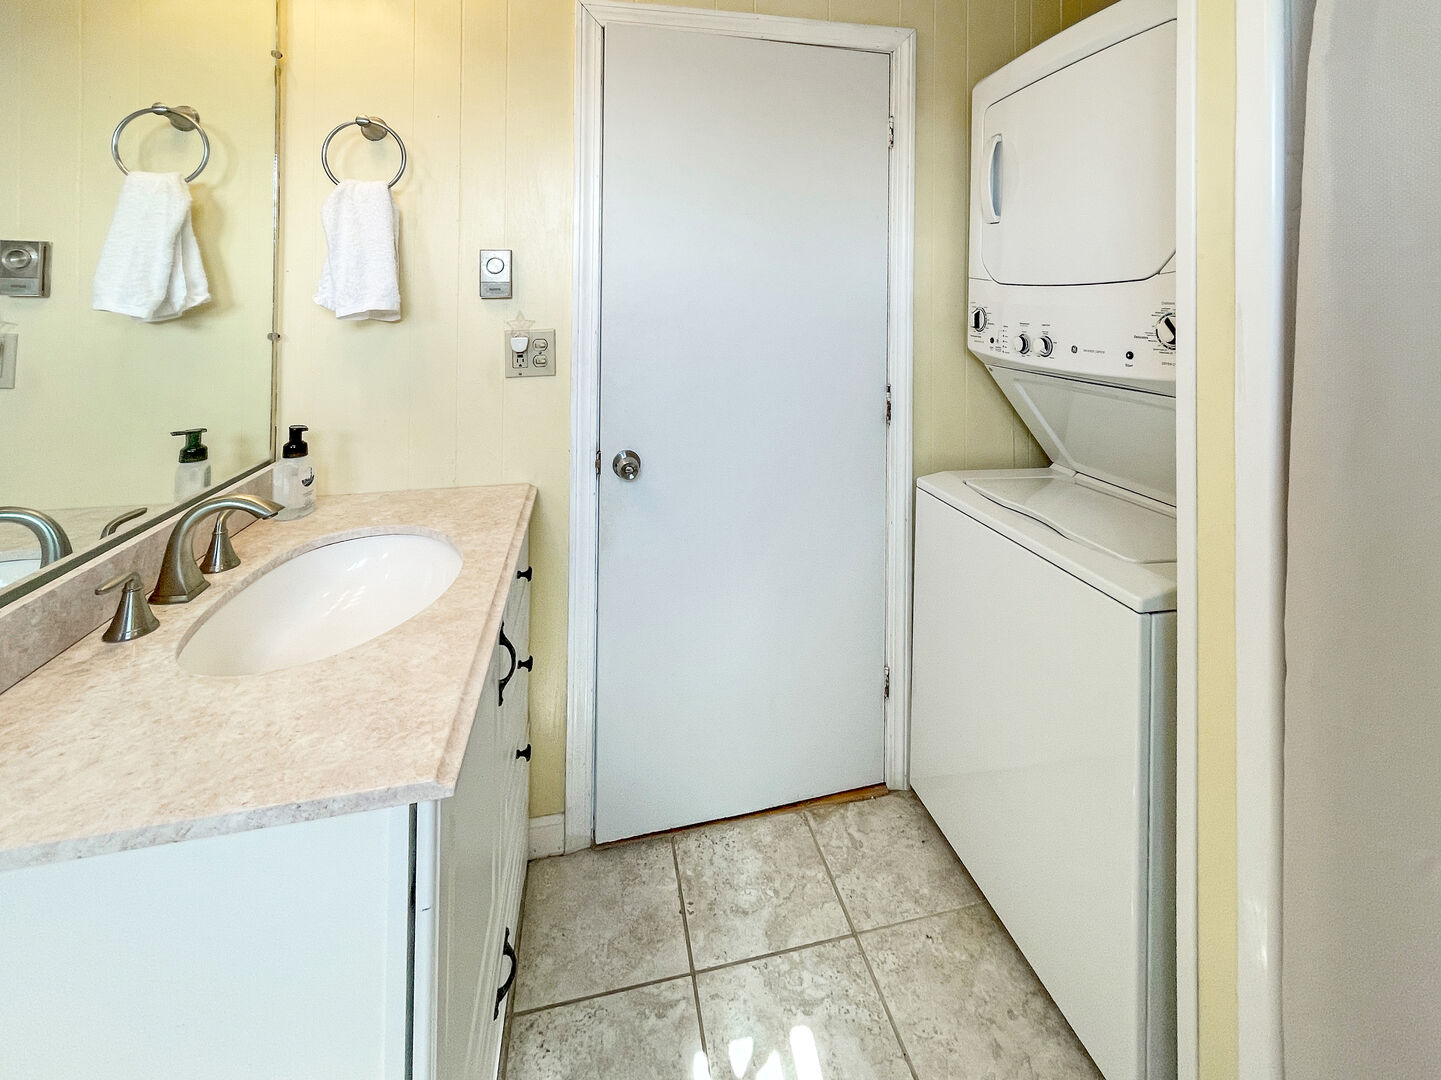 Bathroom with washer and dryer